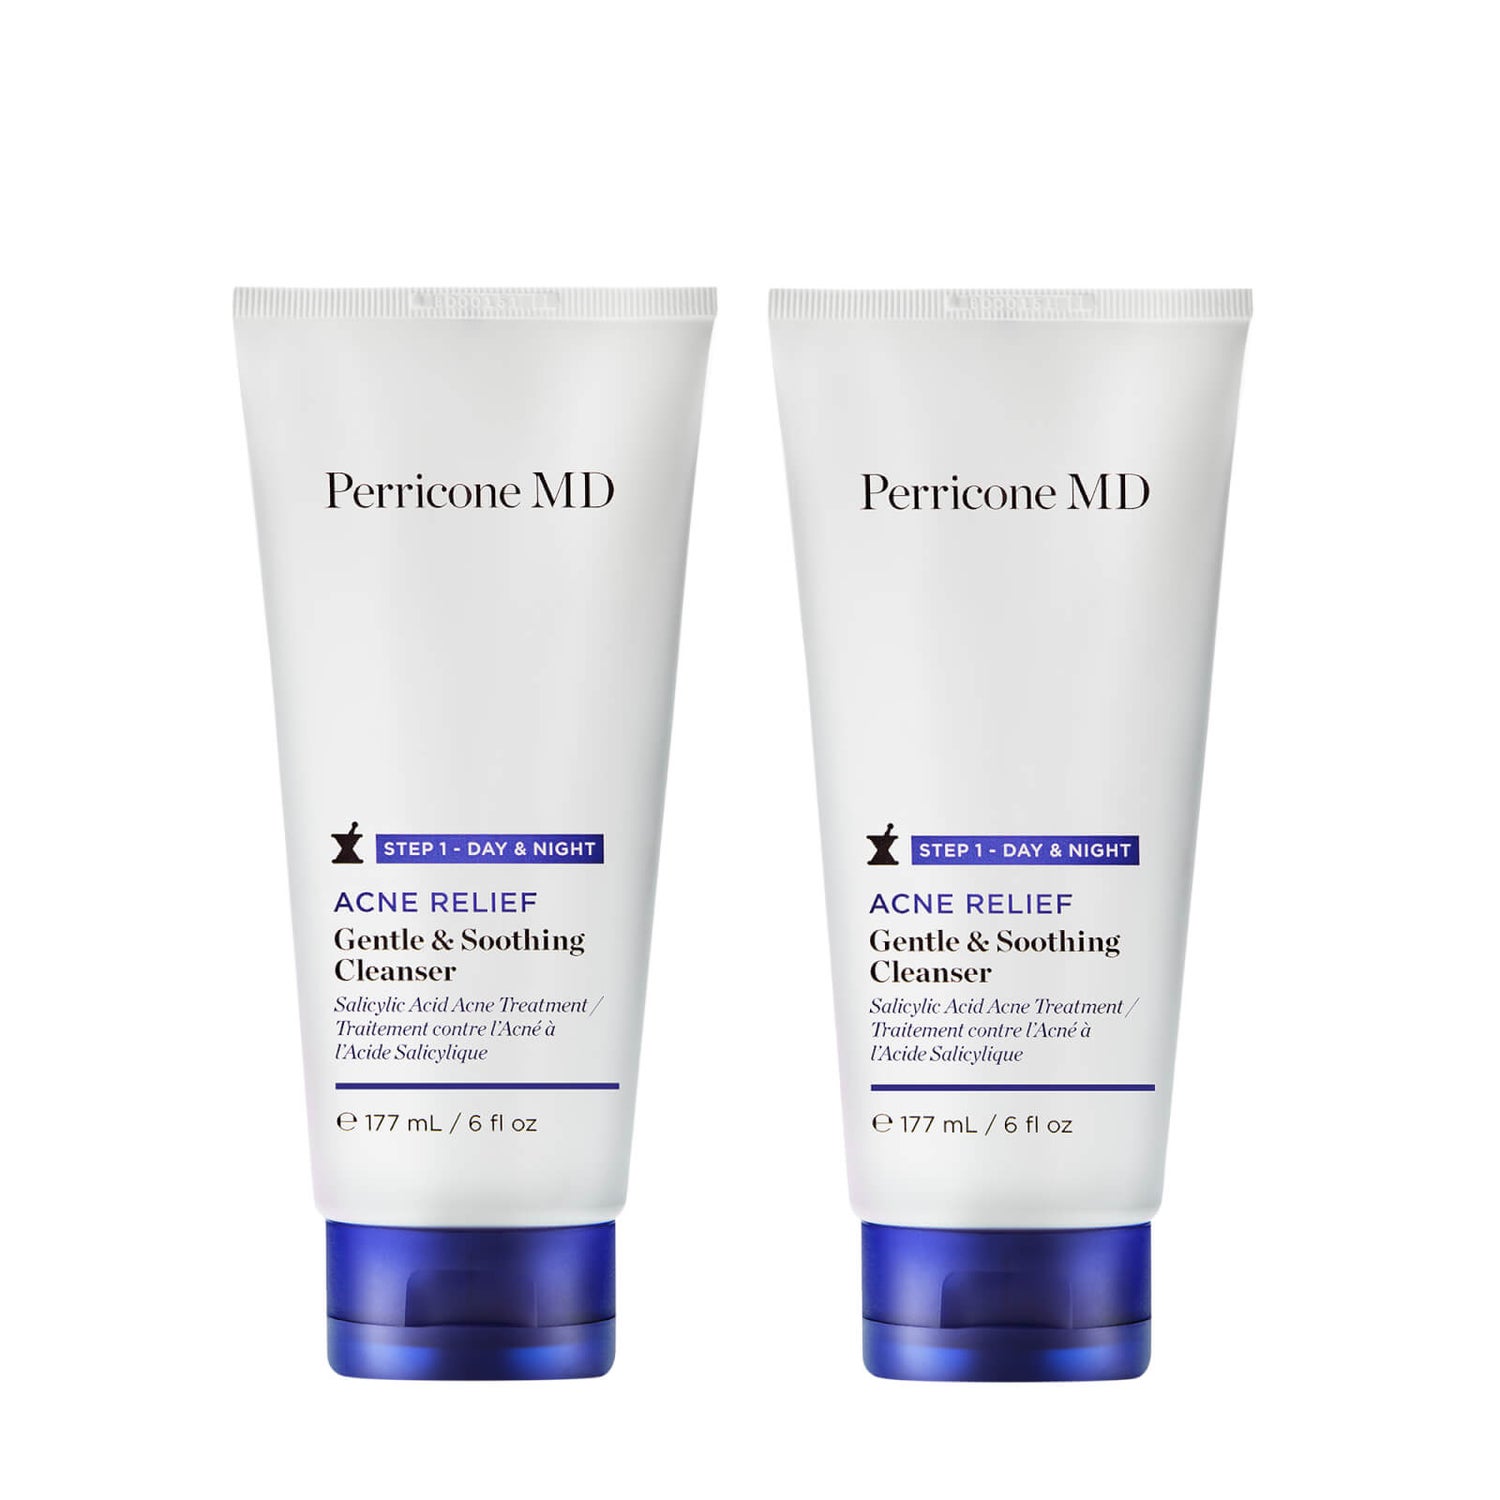 Acne Relief Gentle & Soothing Cleanser Duo